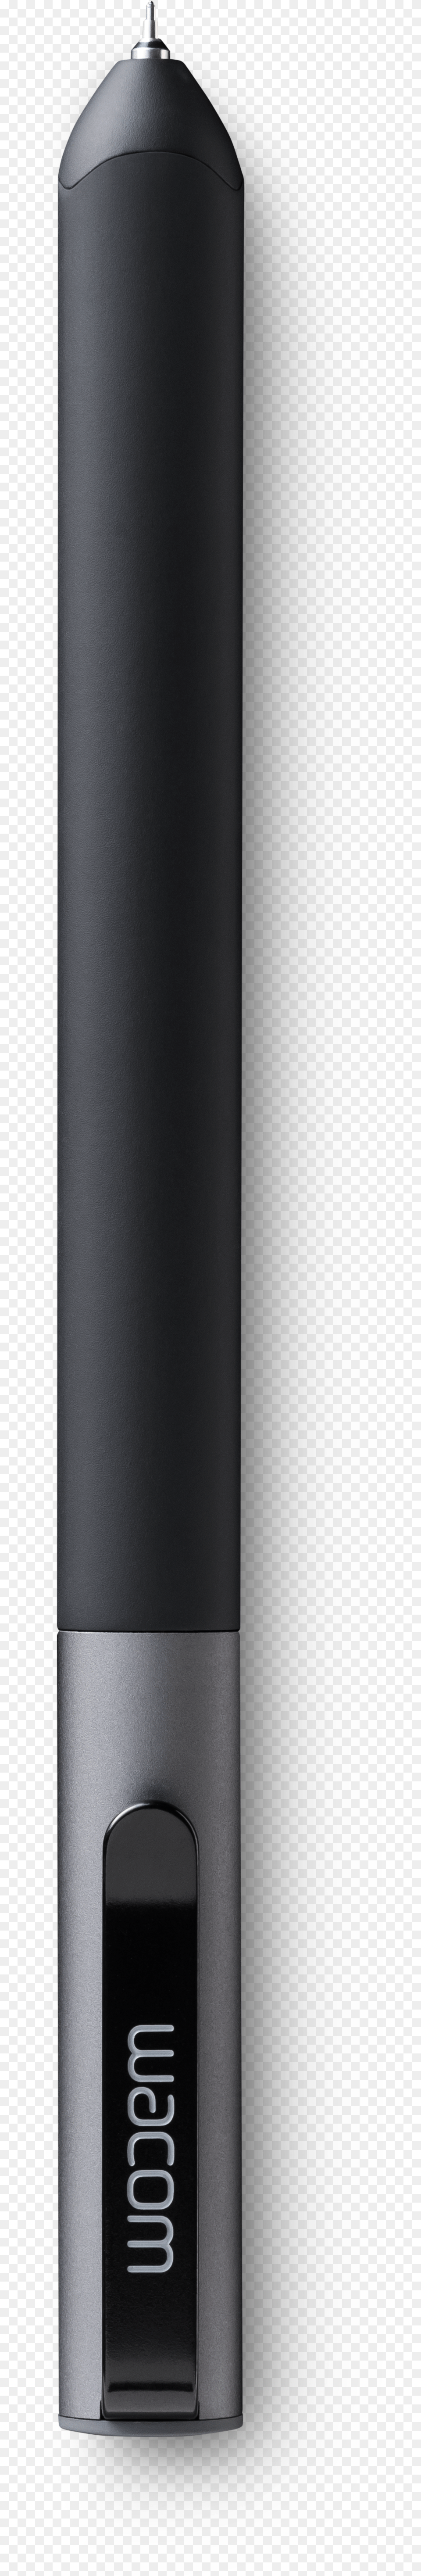 Finetip Pen For Wacom Intuos Pro, Cylinder Png Image